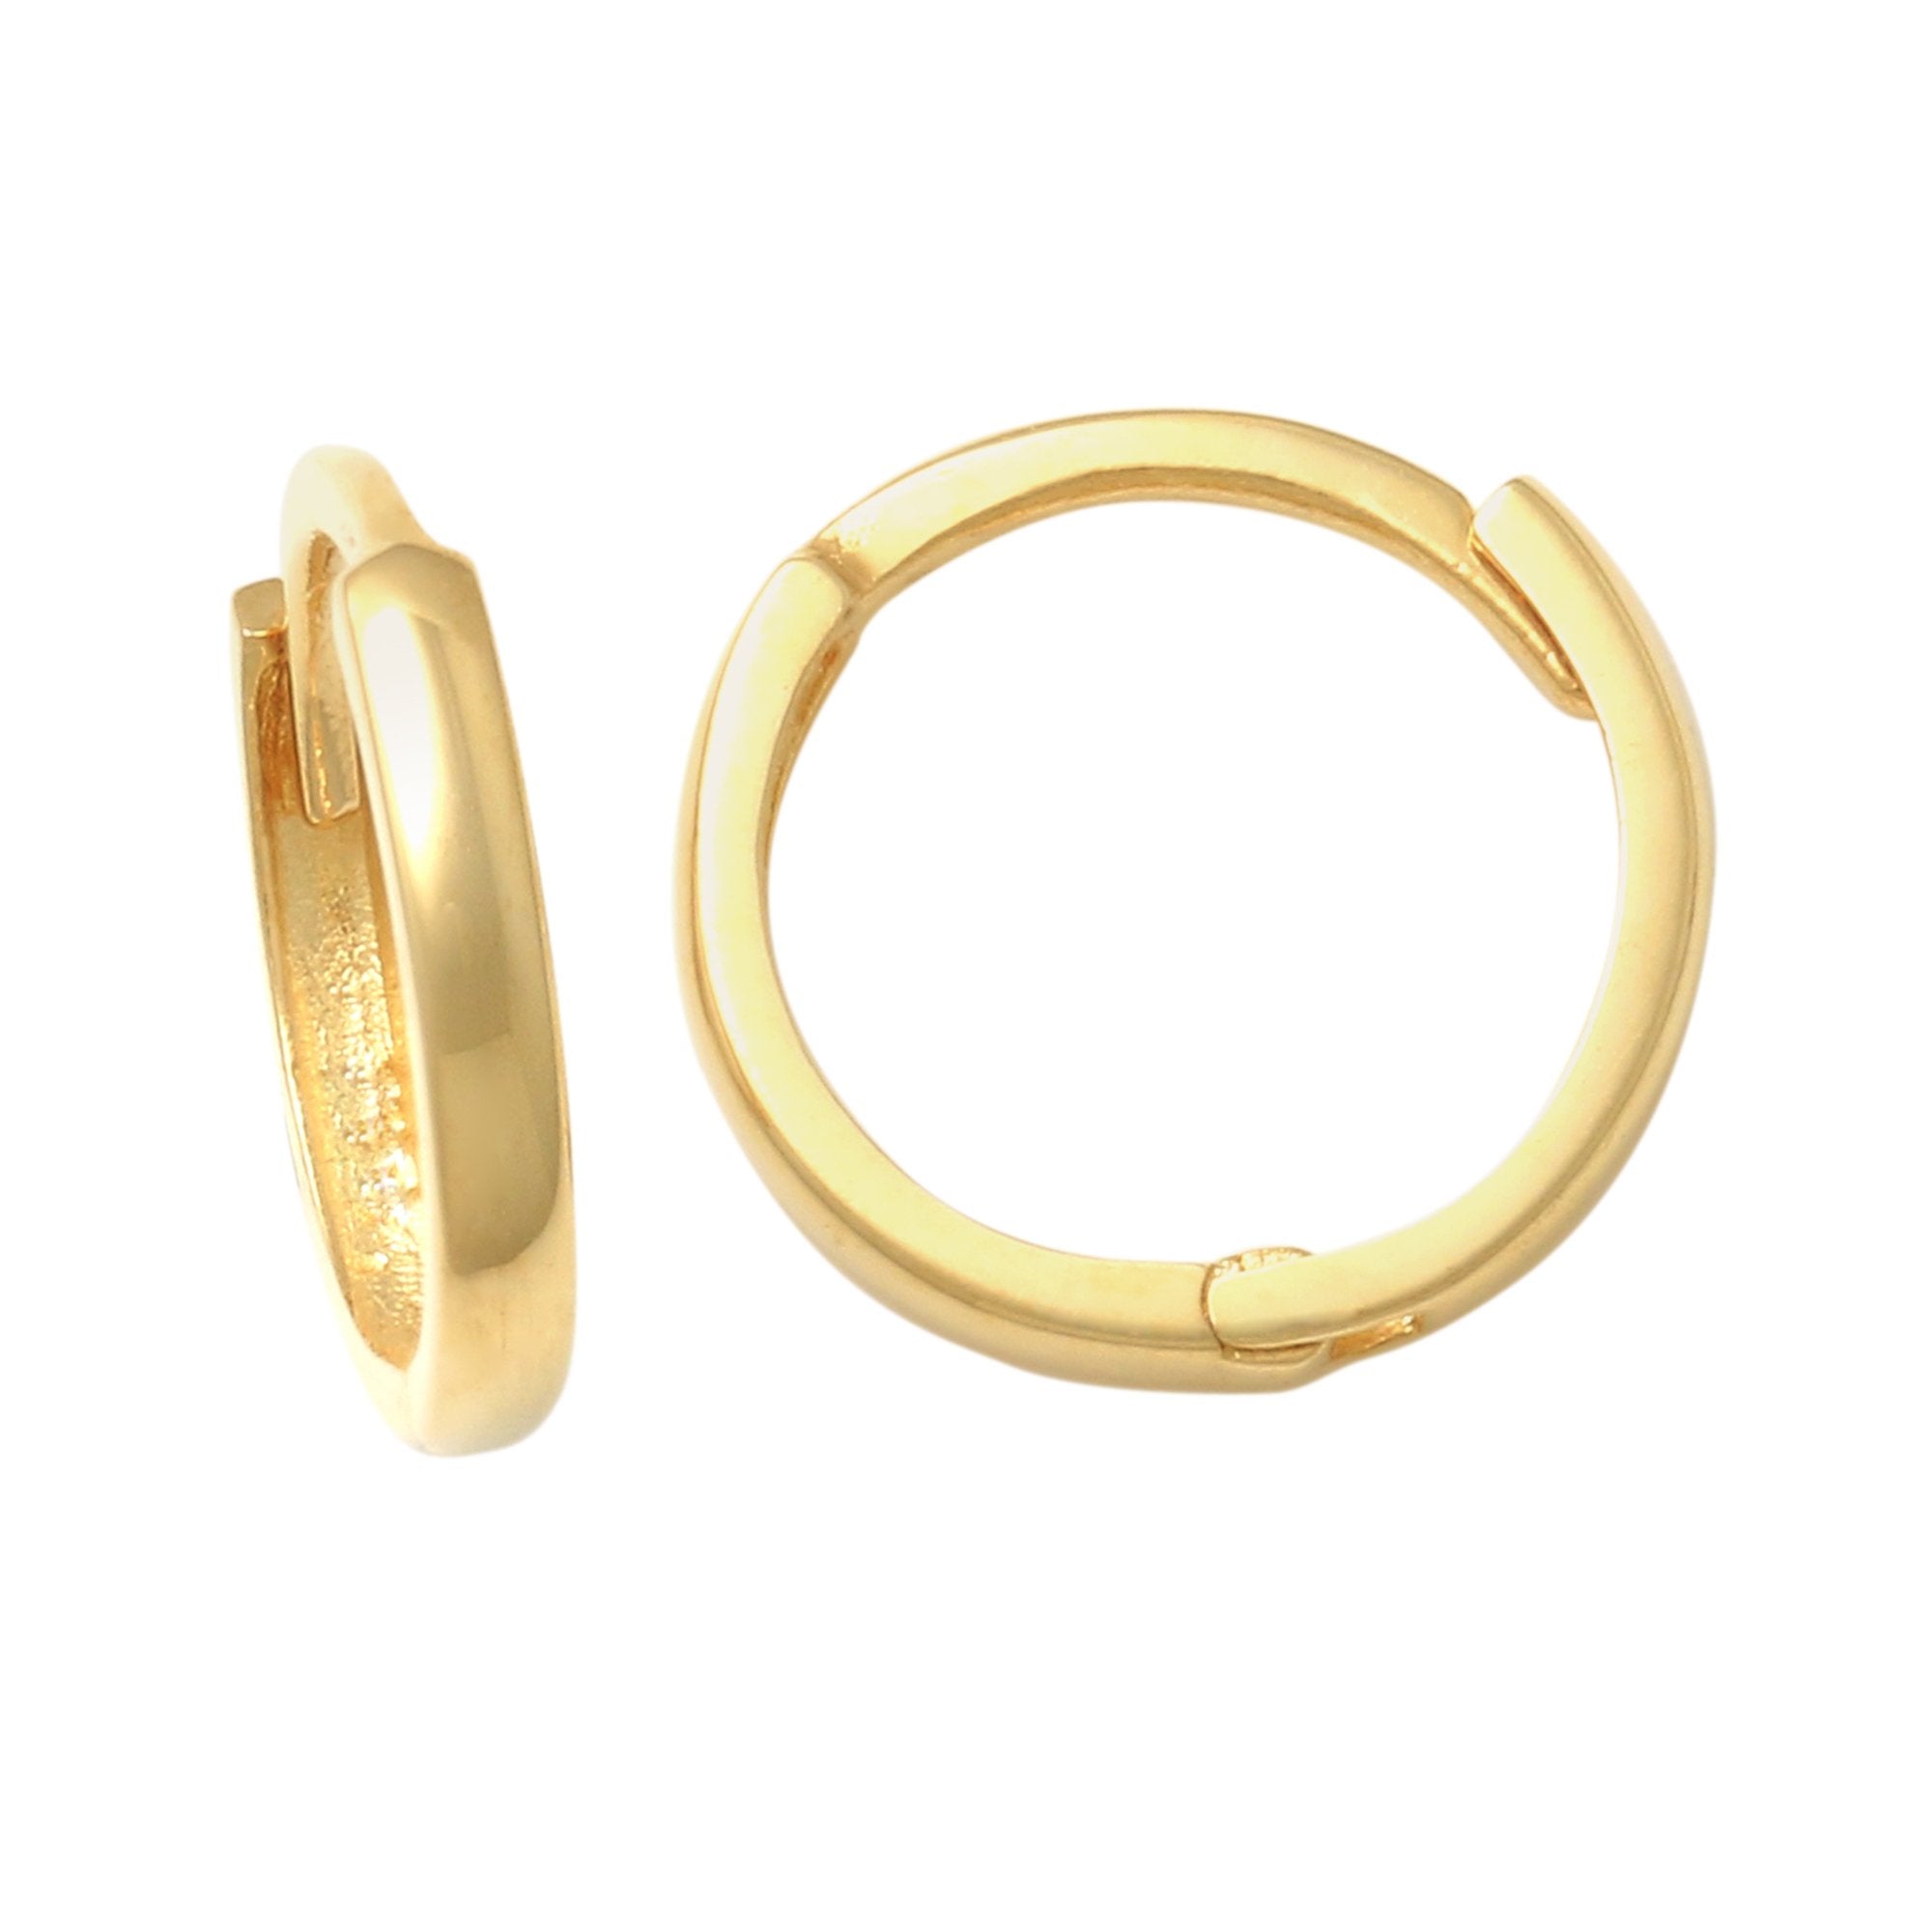 14K Solid Gold Plain Seamless X-Small Hoop Earrings - anygolds